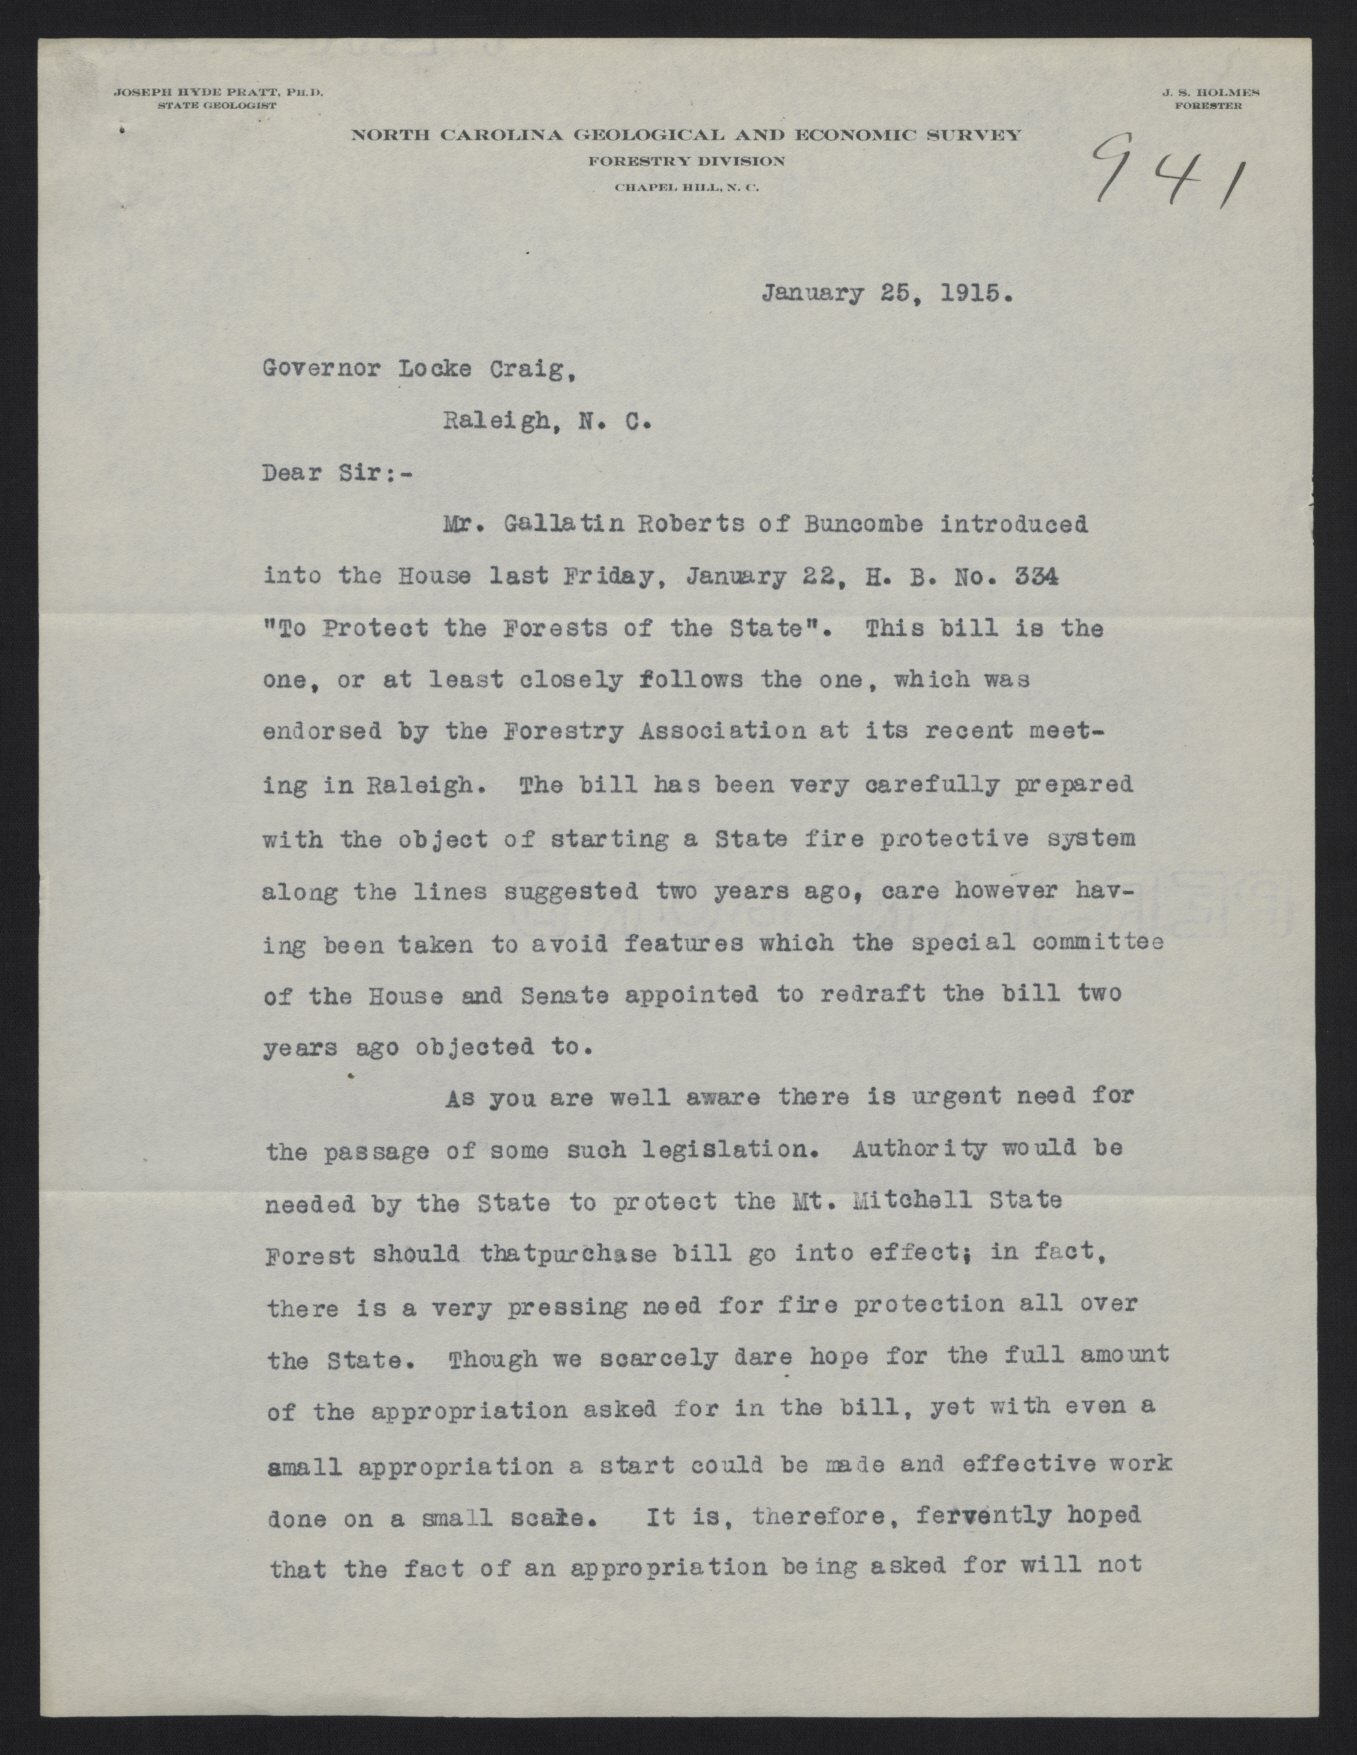 Letter from Holmes to Craig, January 25, 1915, page 1